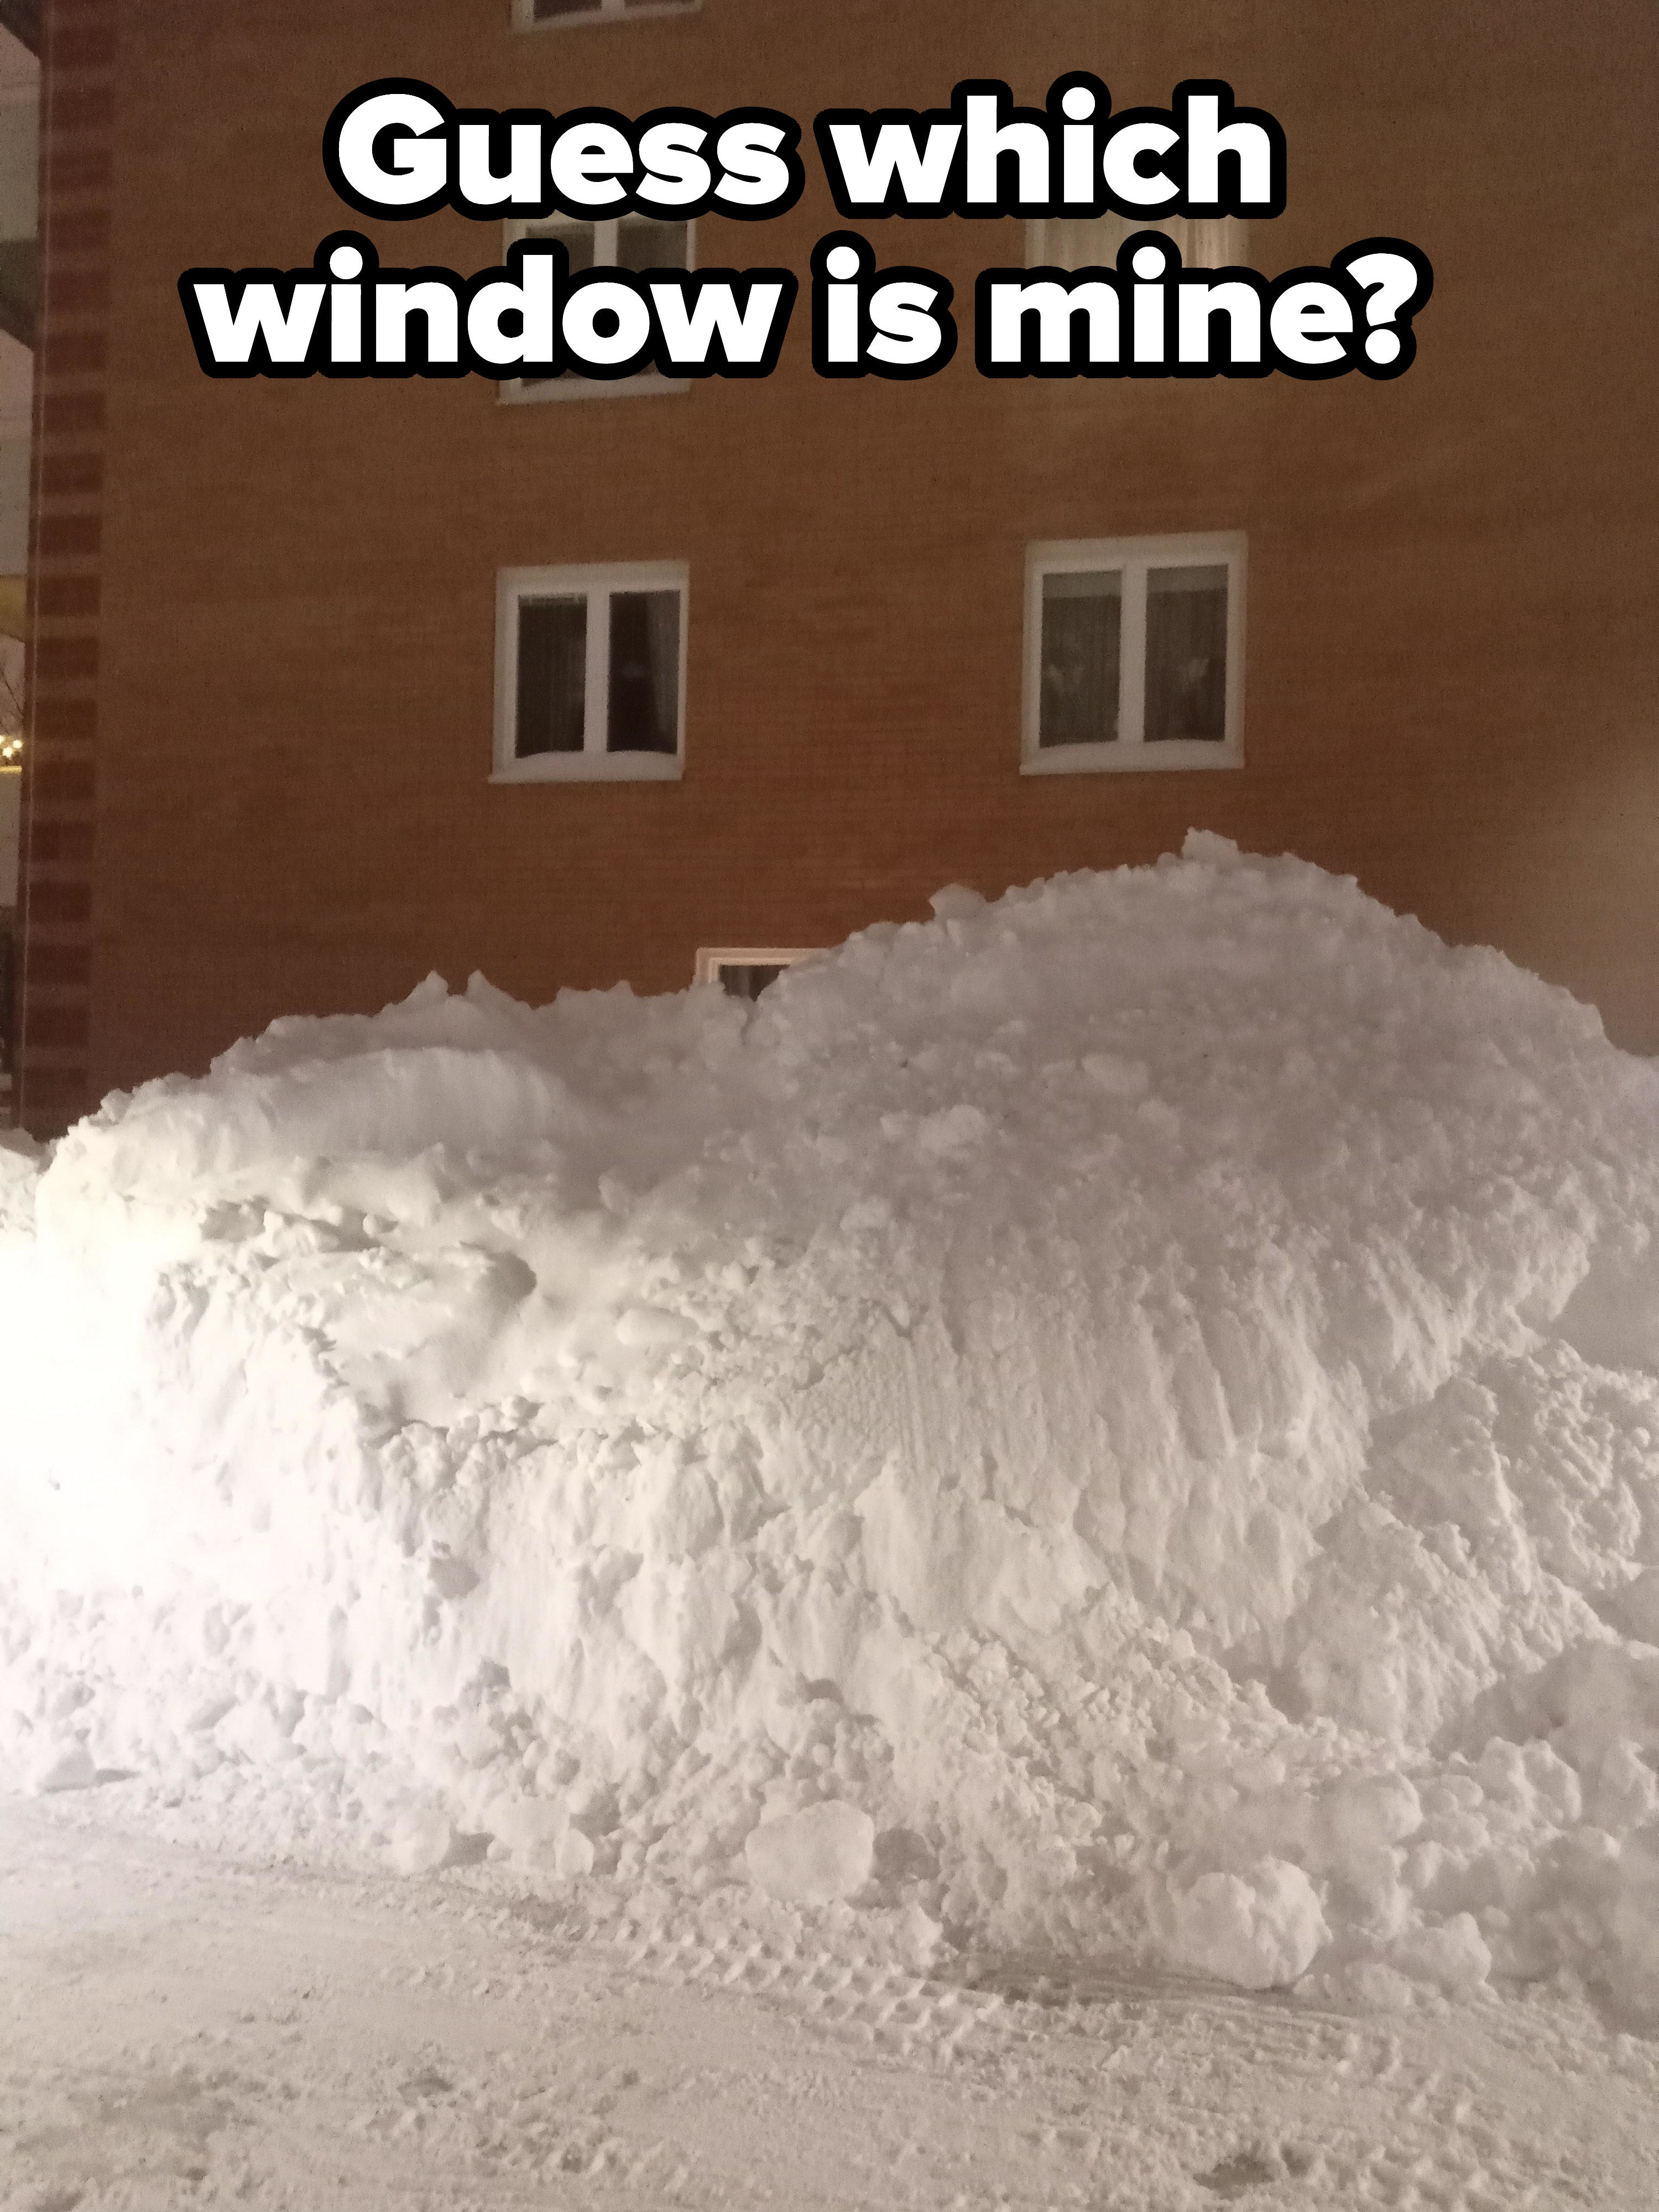 A mountain of snow covering the window of a building